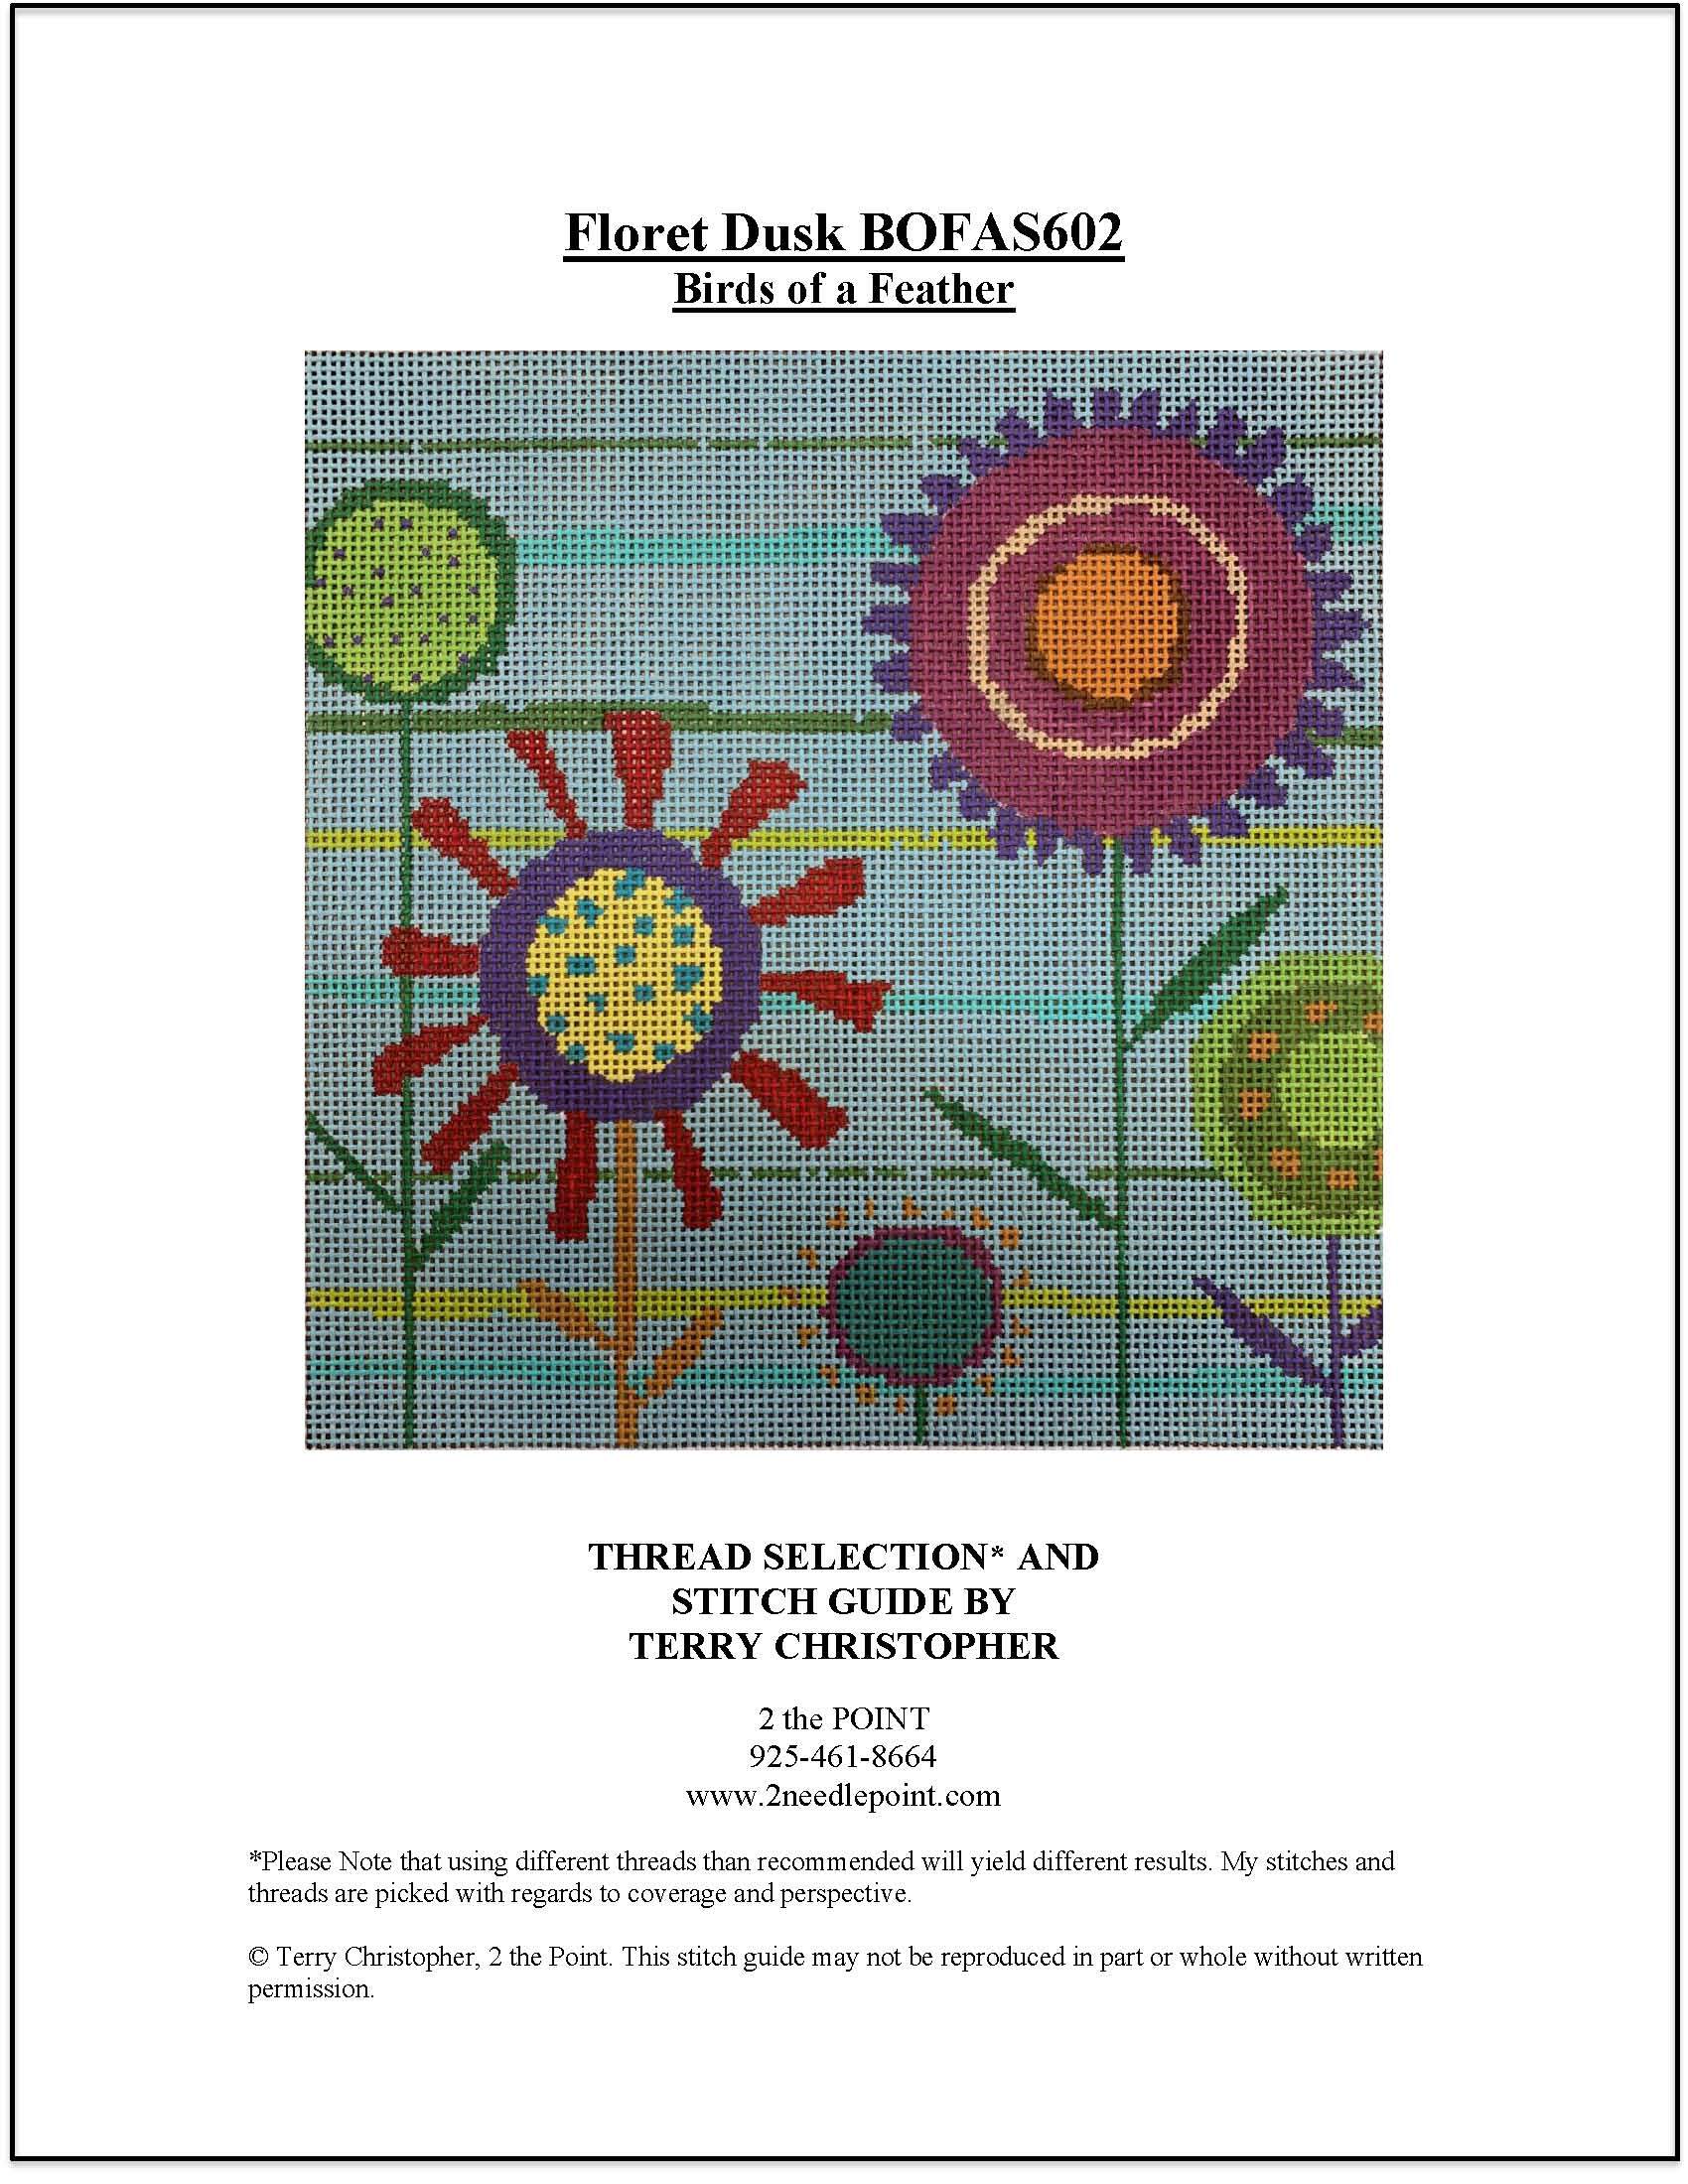 Introduction to Needlepoint: Relax and Stitch, Floor Giebels